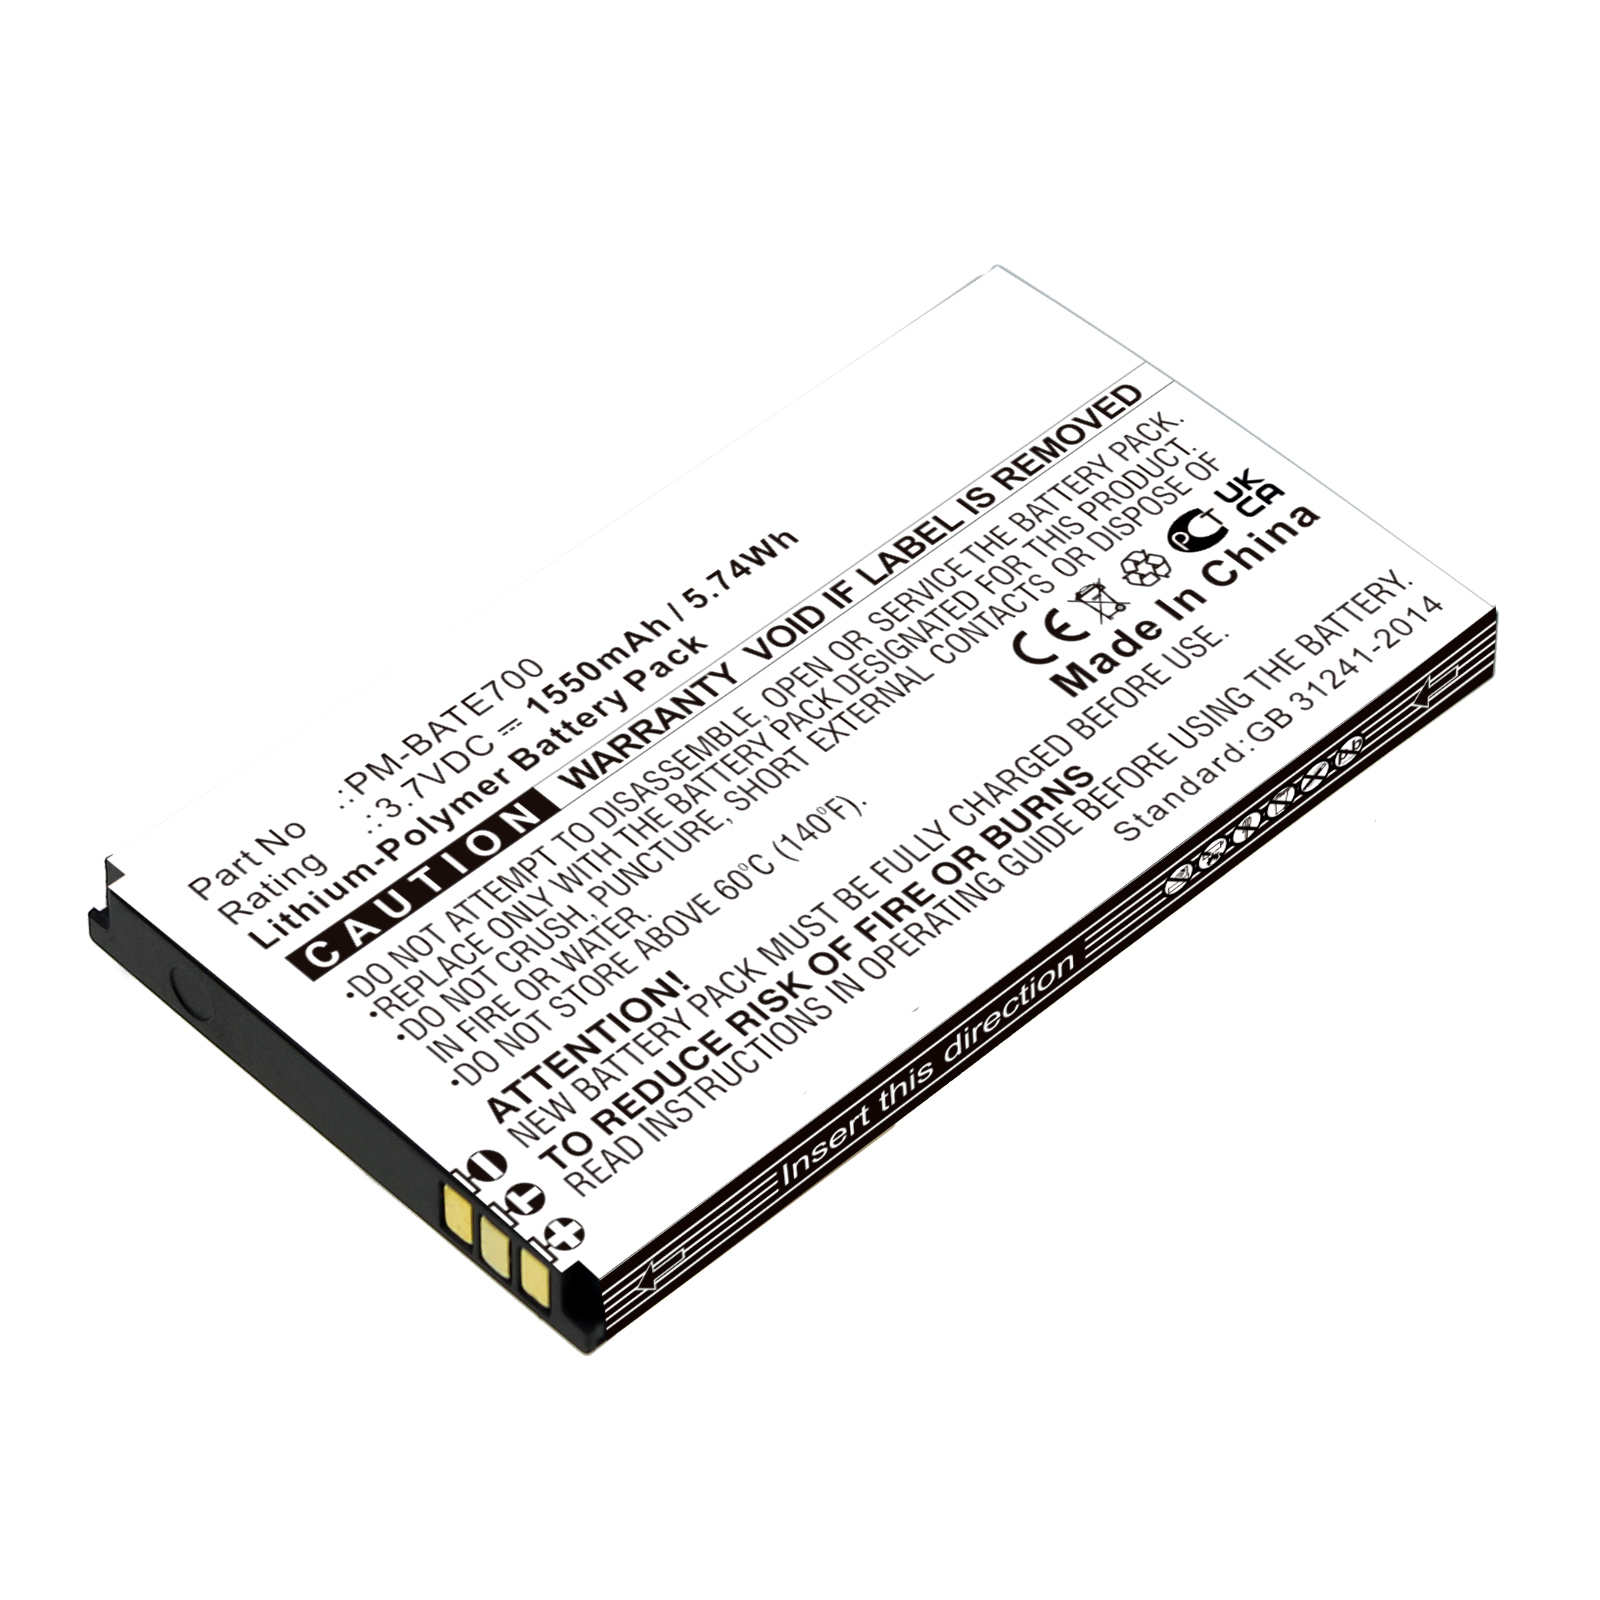 Synergy Digital Cell Phone Battery, Compatible with Plum PM-BATE700 Cell Phone Battery (Li-Pol, 3.7V, 1550mAh)